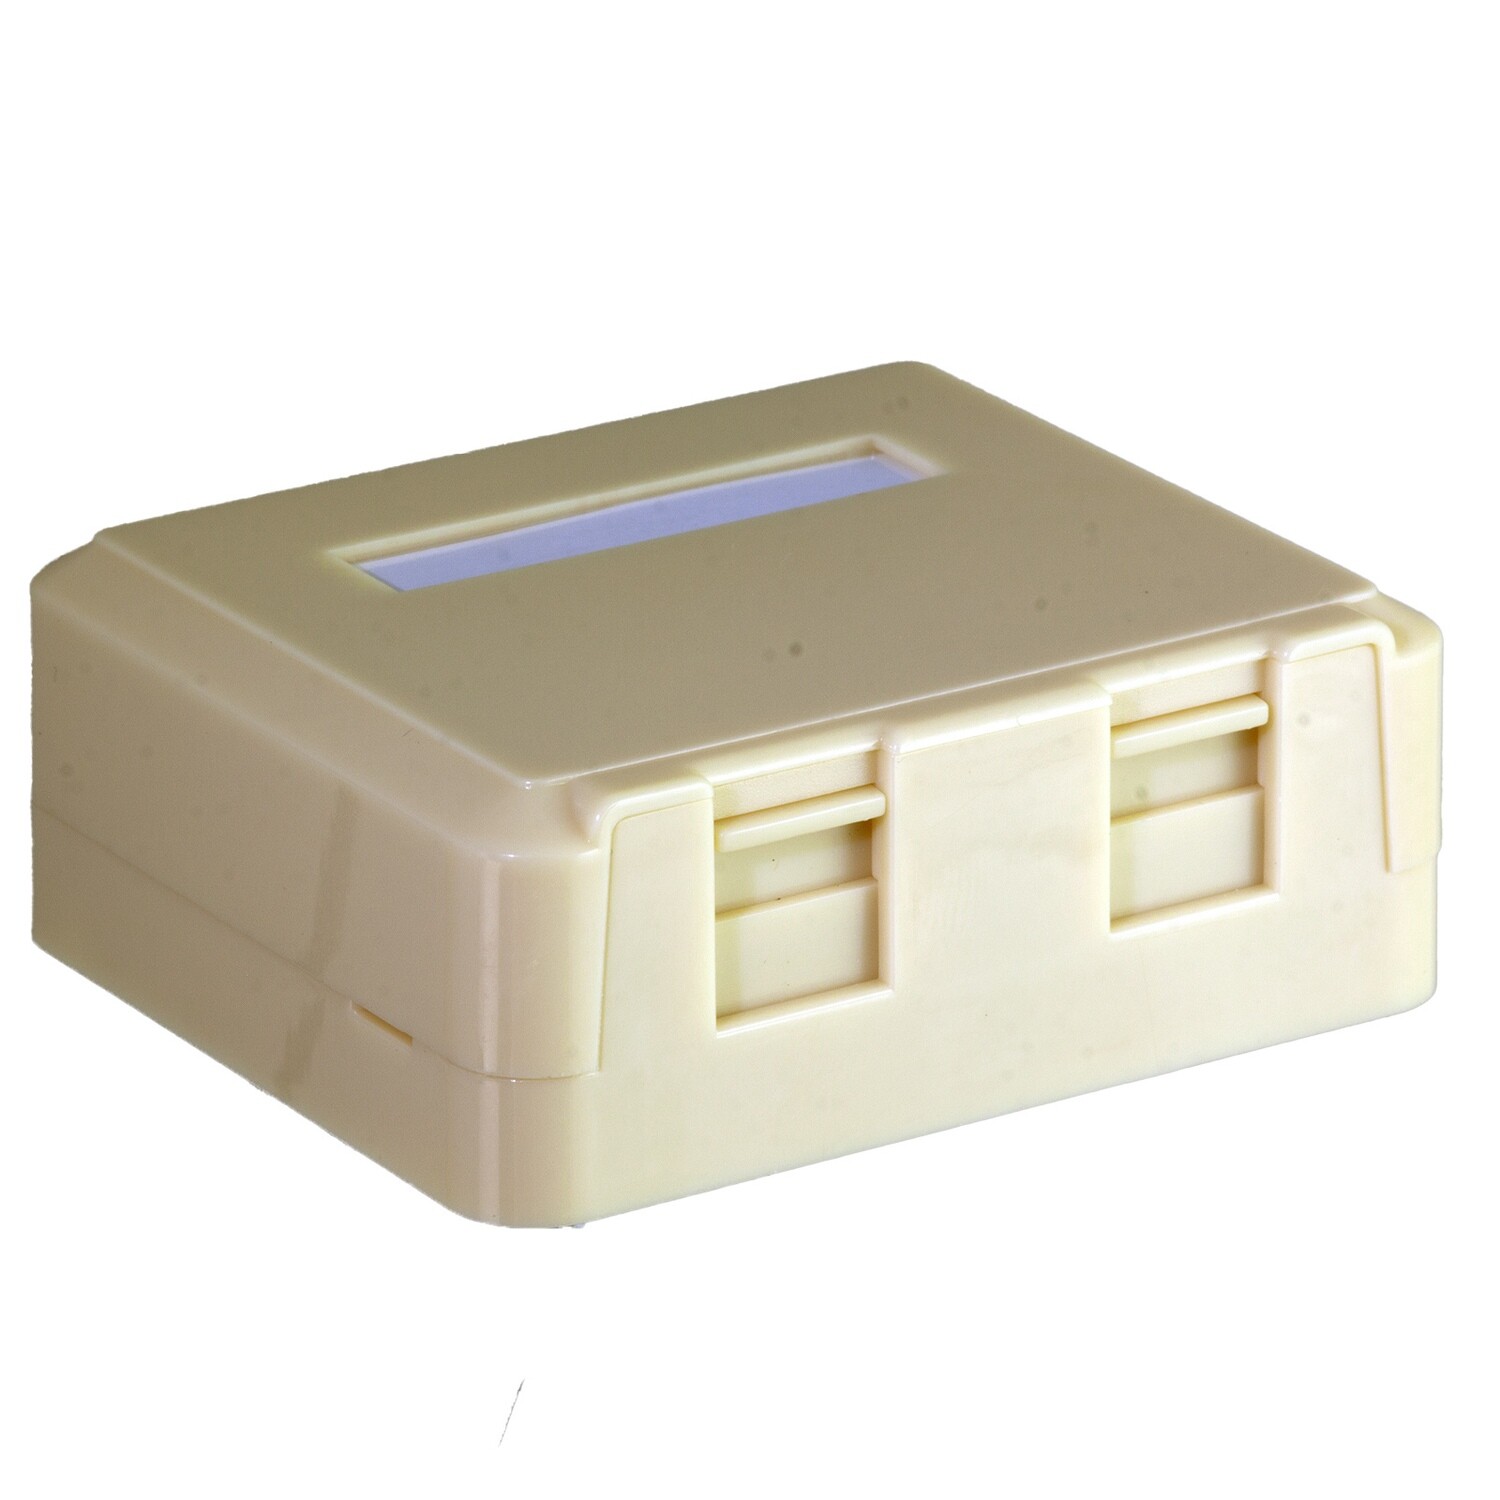 2 Port Surface Mount Box with Dust Door as Low as $.69 ea.